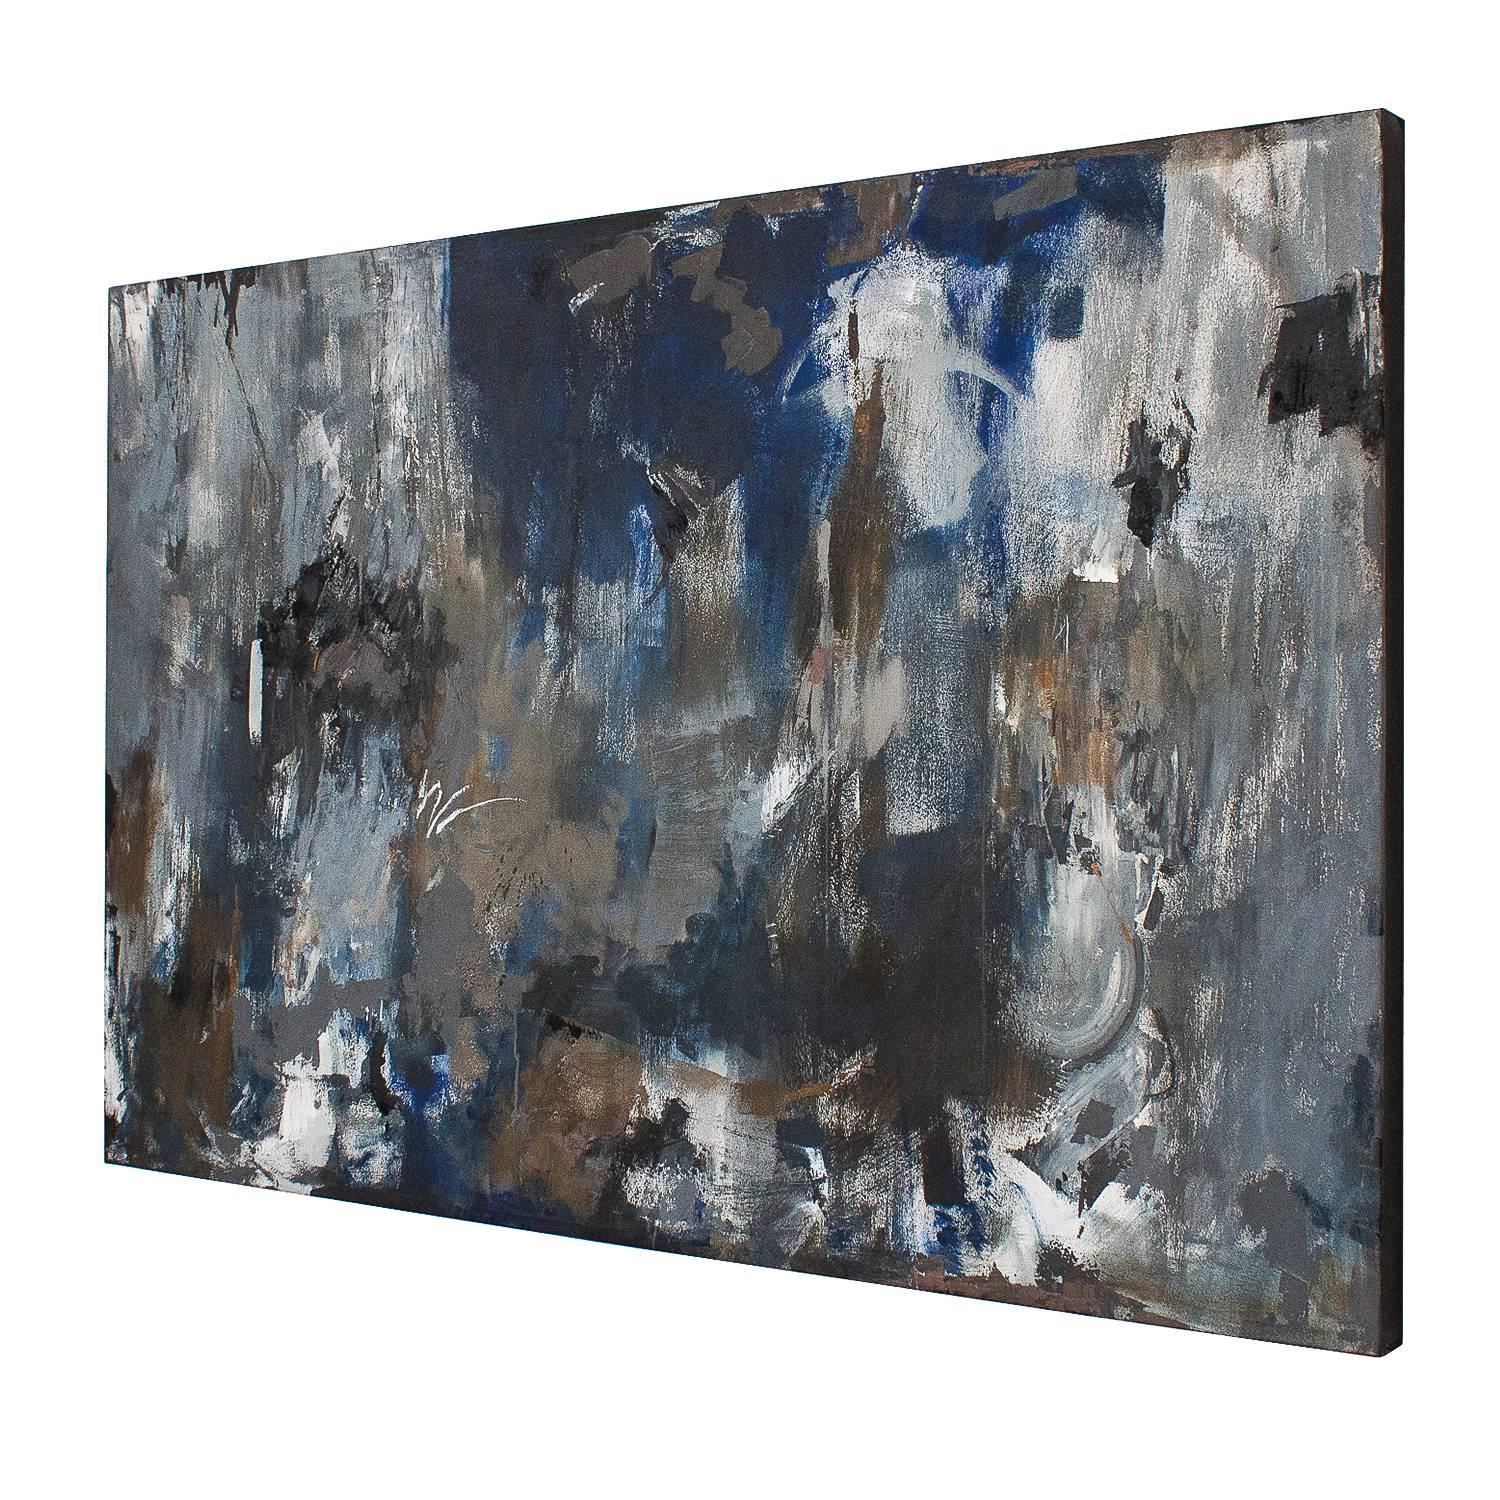 Large 46" x 70" original abstract painting by Happy Fowler. Titled "Midnight Crossing". Abstract Expressionist painting in blues, greys, browns, and black colors throughout. Unframed. Stretched canvas with black painted edge.